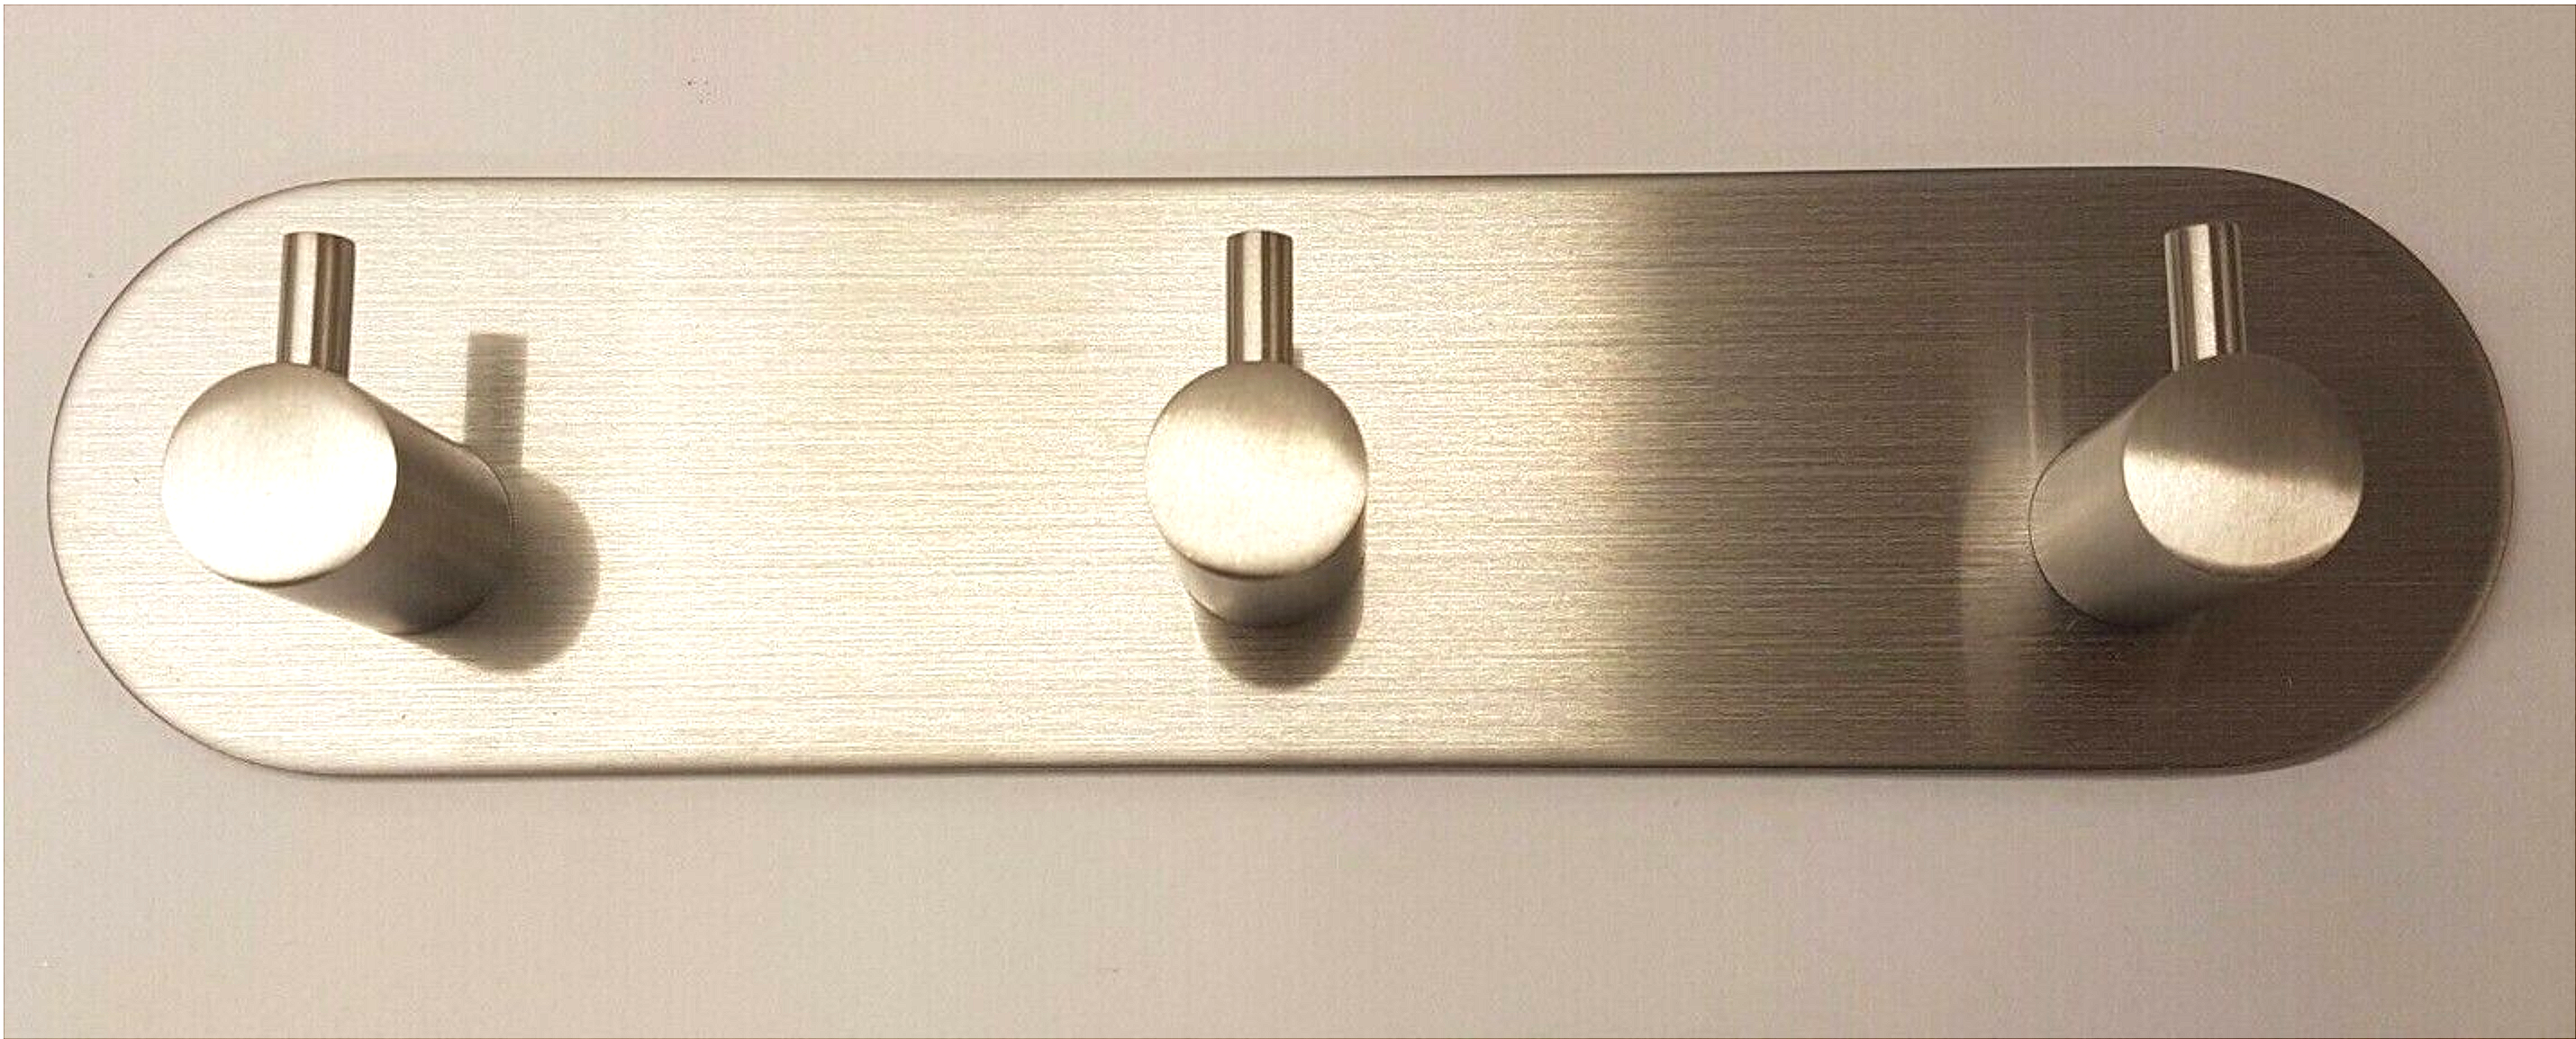 Trio Coat Hook Satin Stainless Steel 190x46mm (3m Self Adhesive Backing)  32367